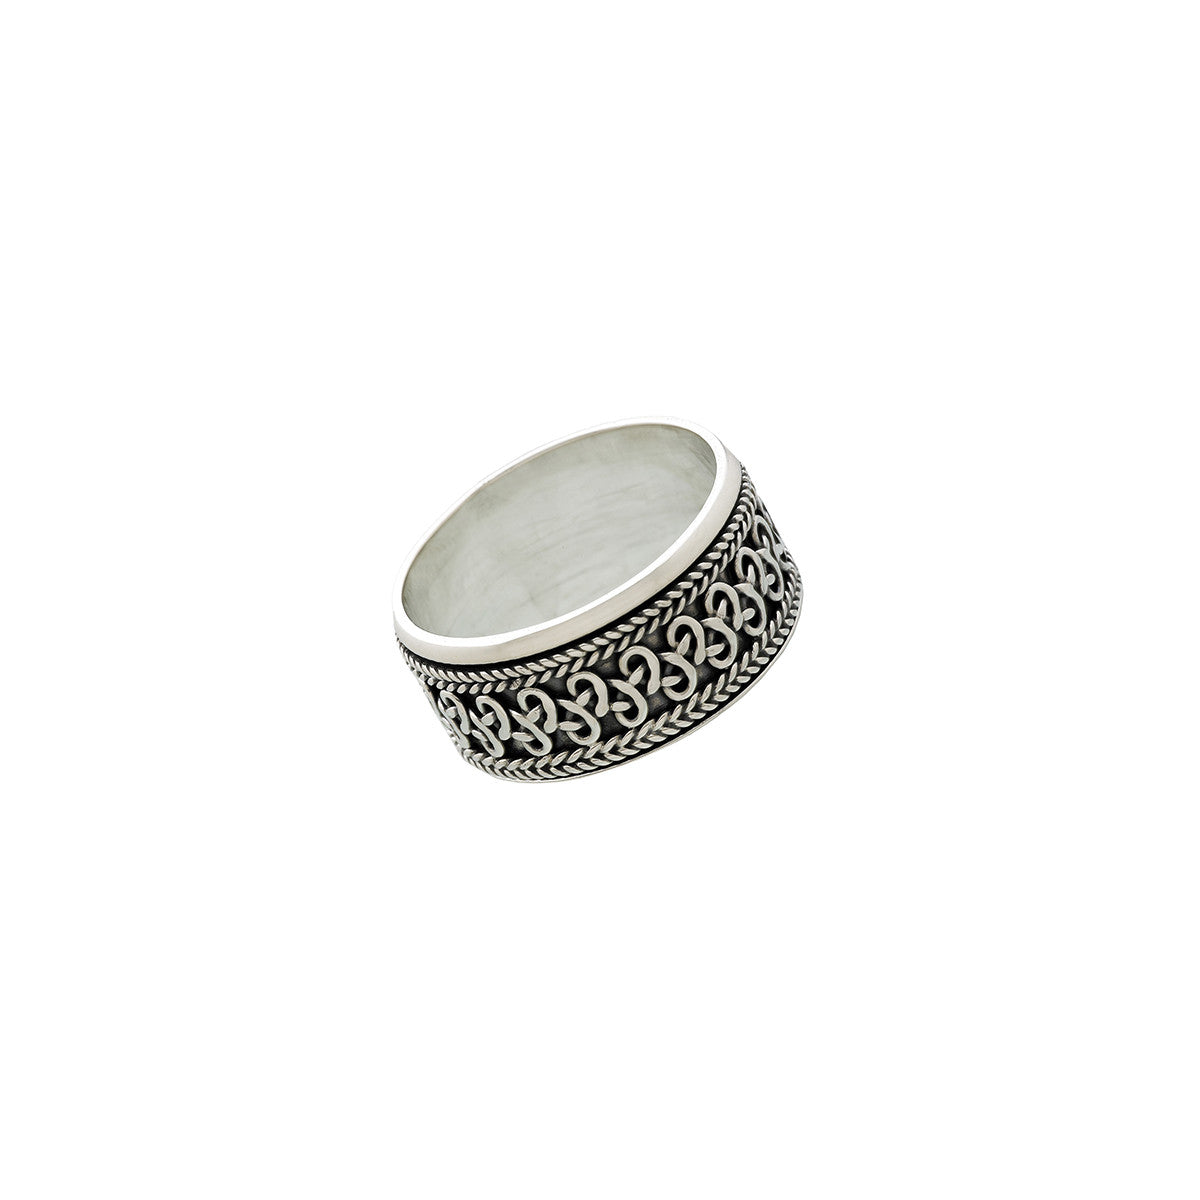 Beta Infinity Sterling Silver Spin Ring - Cynthia Gale New York Jewelry